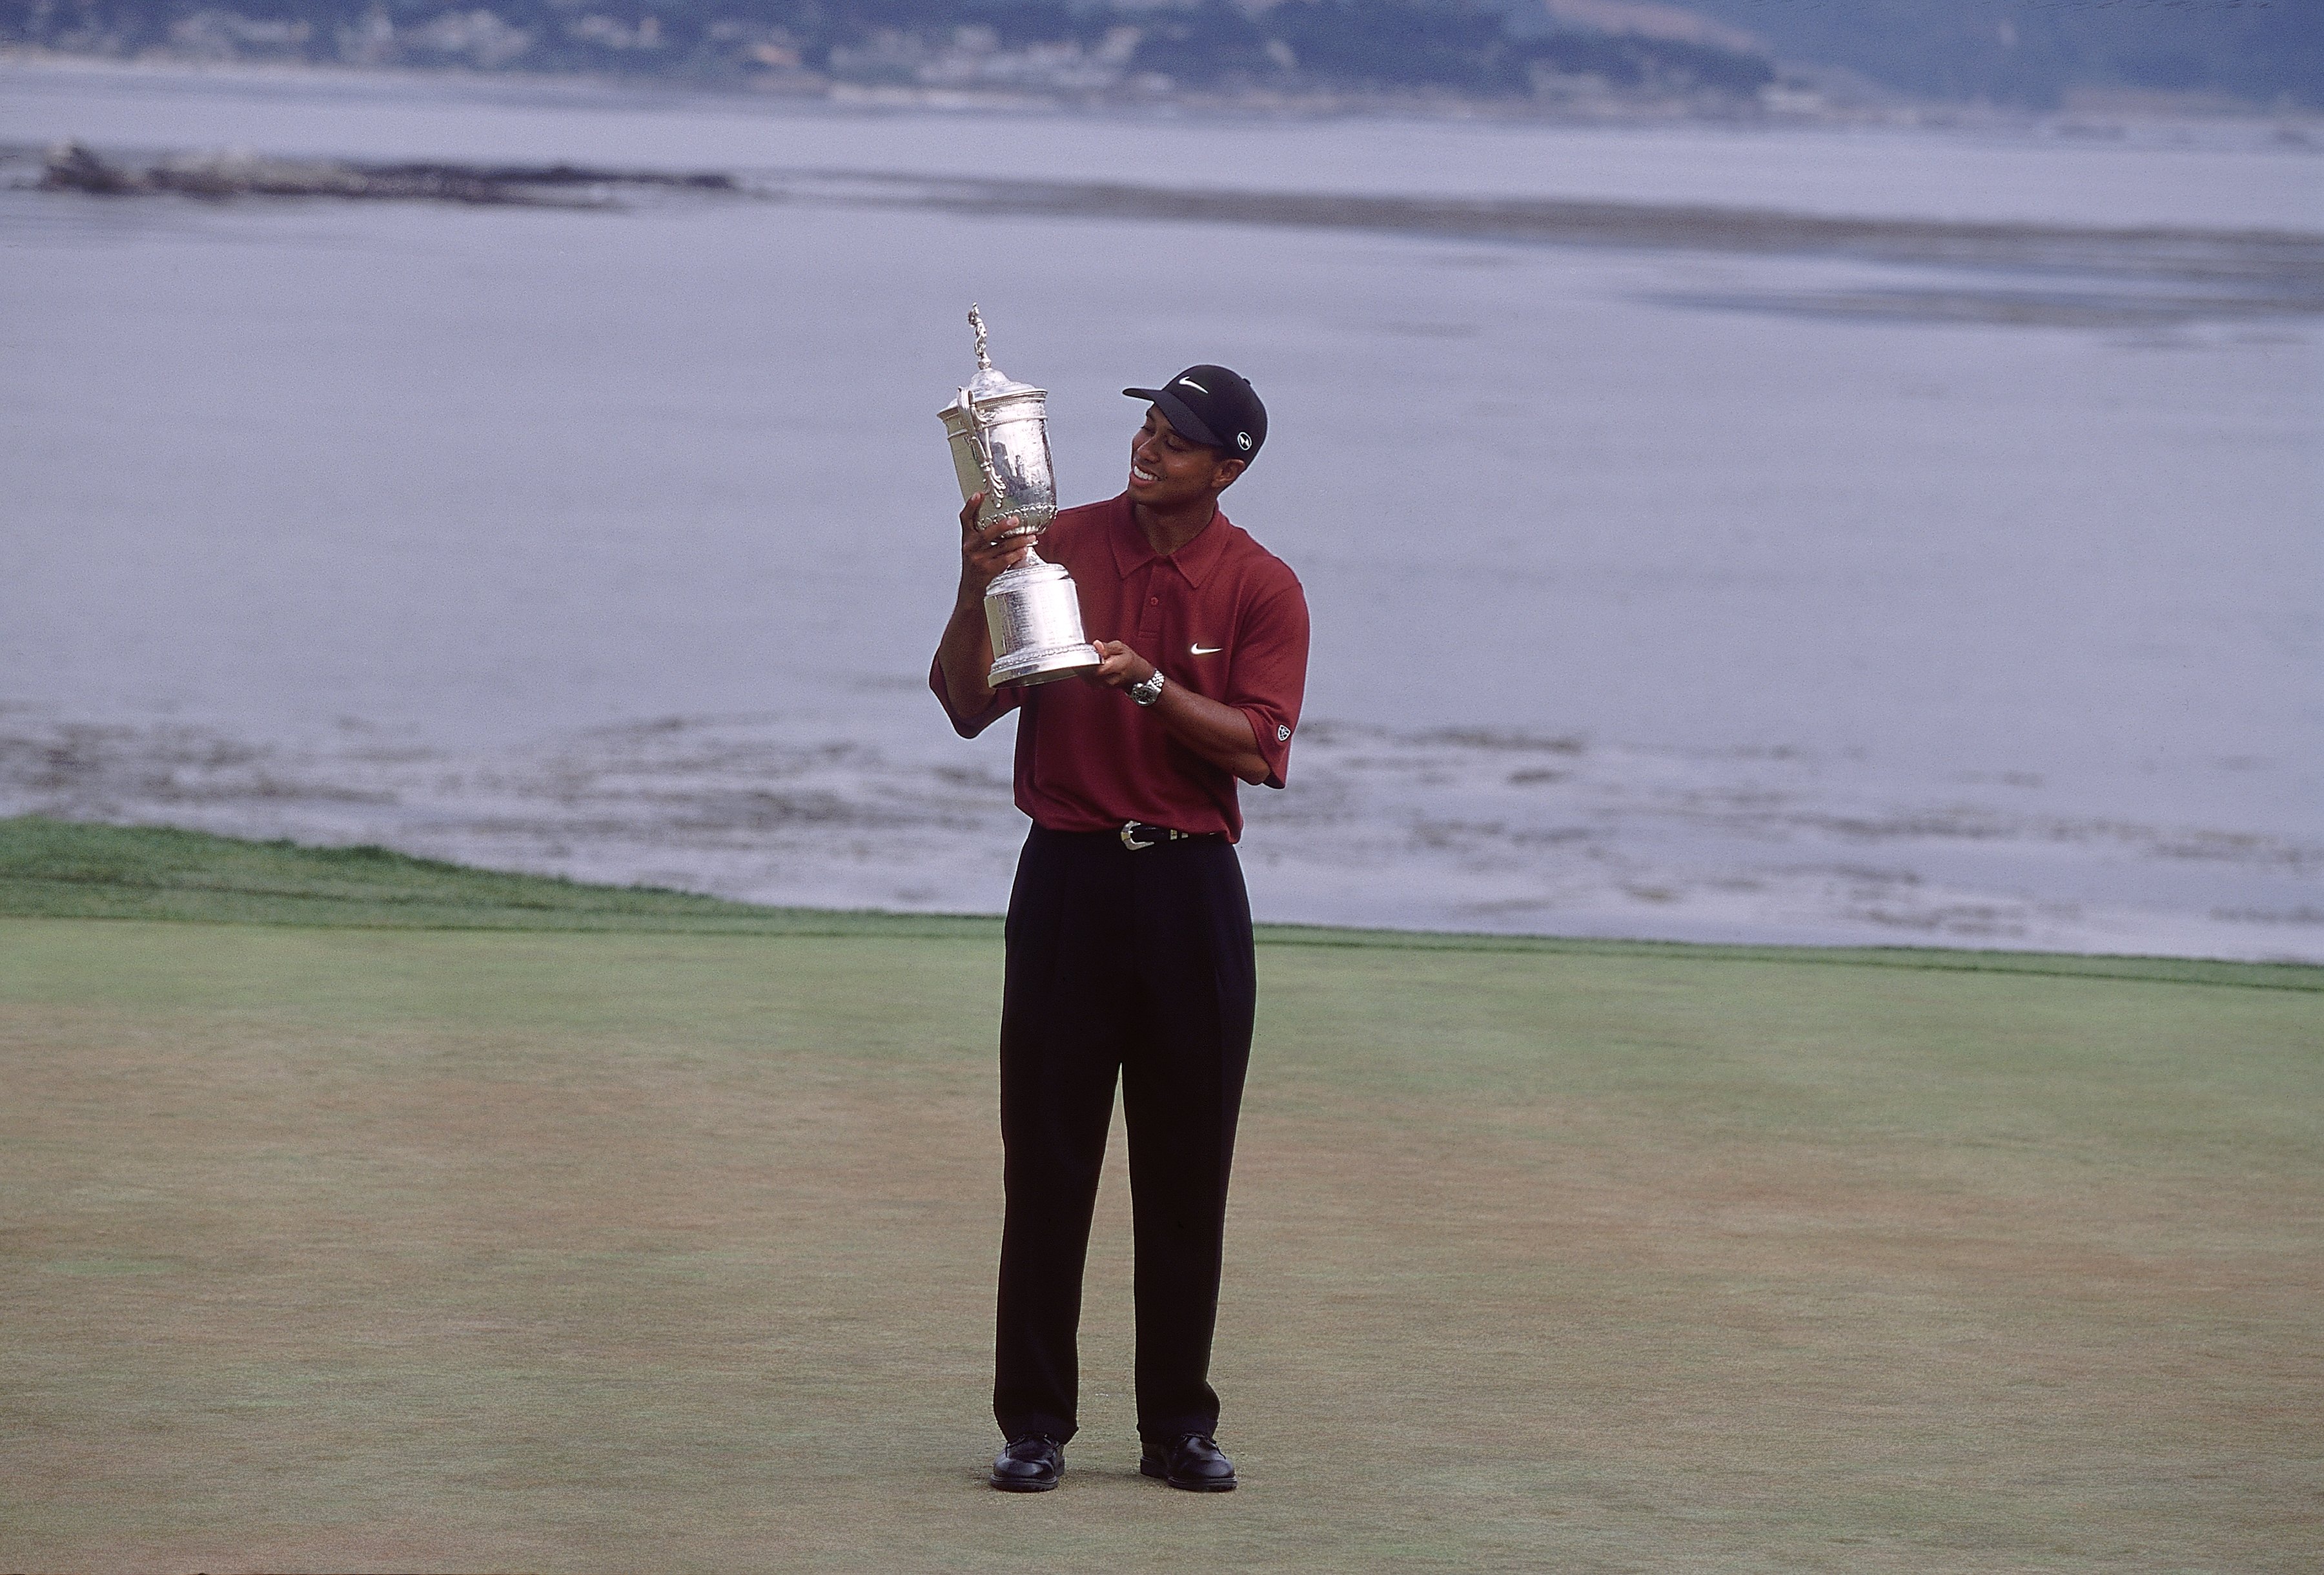 Tiger Woods holds the US Open trophy at Pebble Beach in 2000